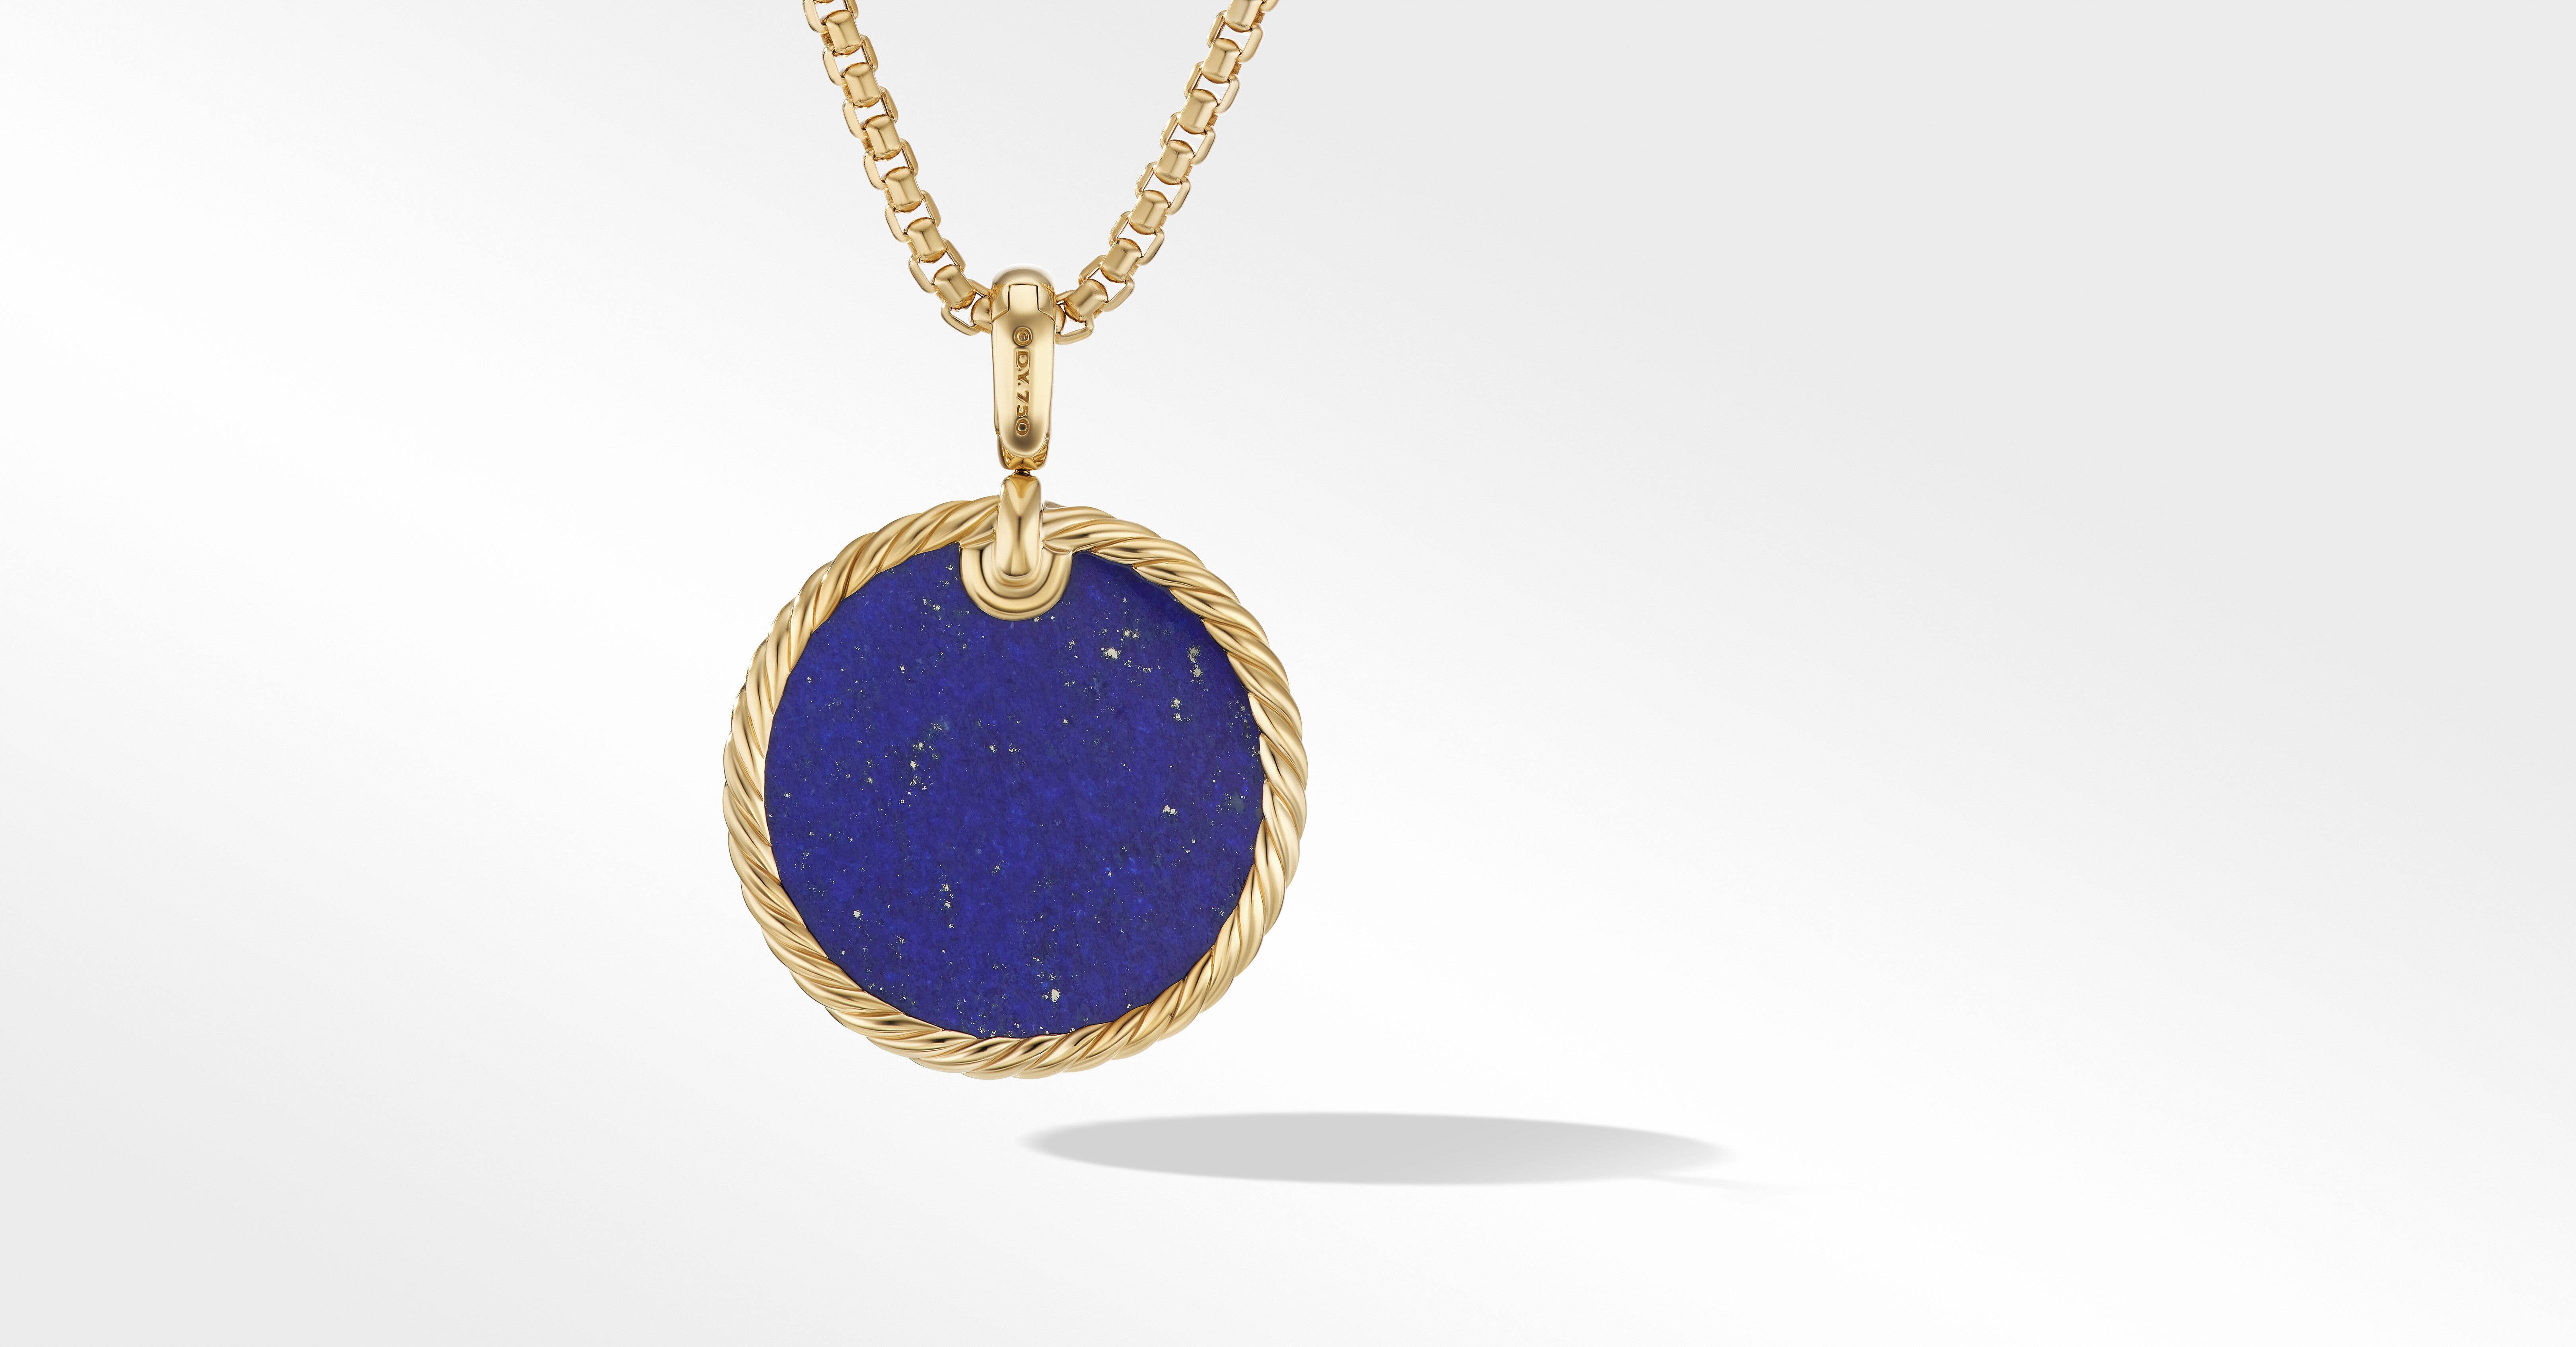 DY Elements® Disc Pendant in 18K Yellow Gold with Lapis